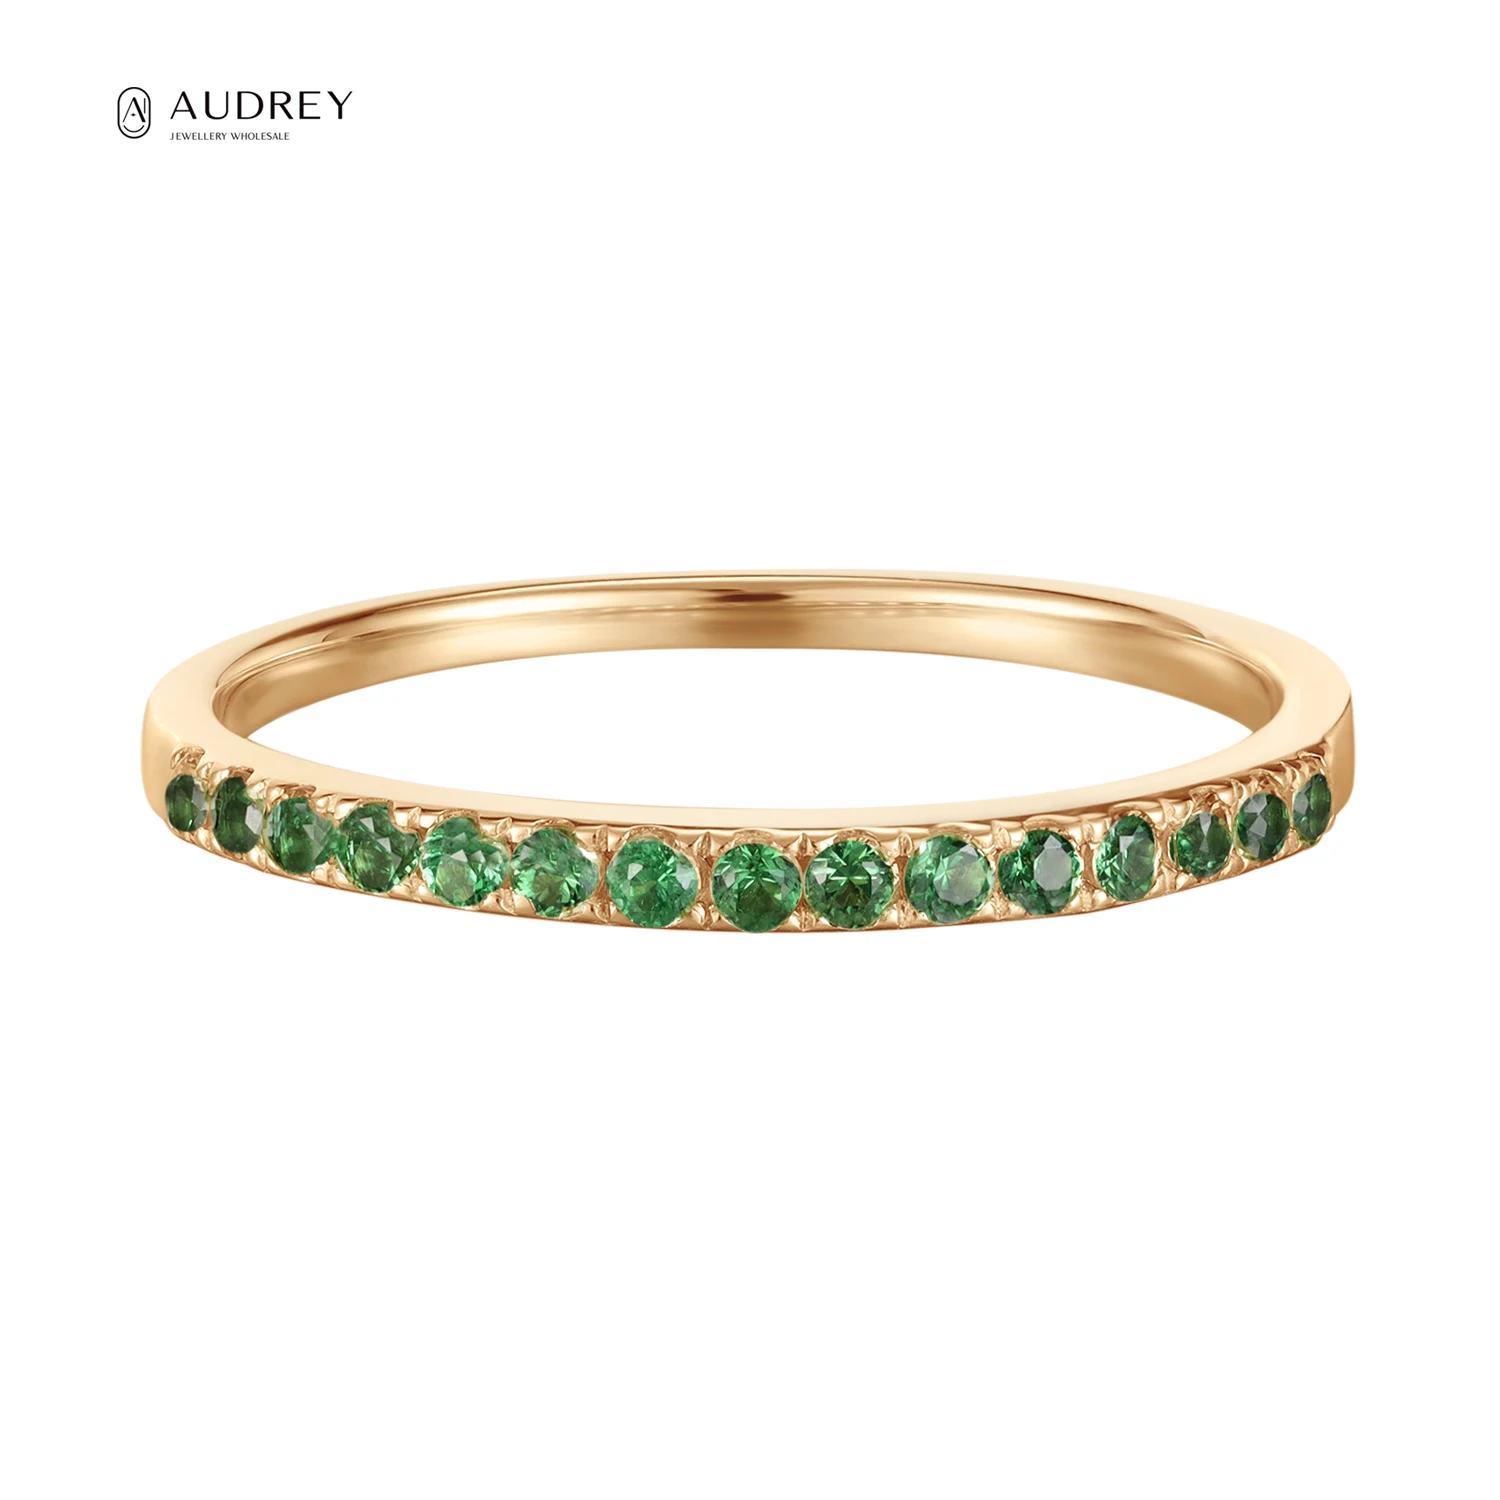 

Audrey Fashion Luxury Jewelry Birthstone Rings Customizable Jewelry 14k Solid Gold Gemstone Engagement Ring For Women